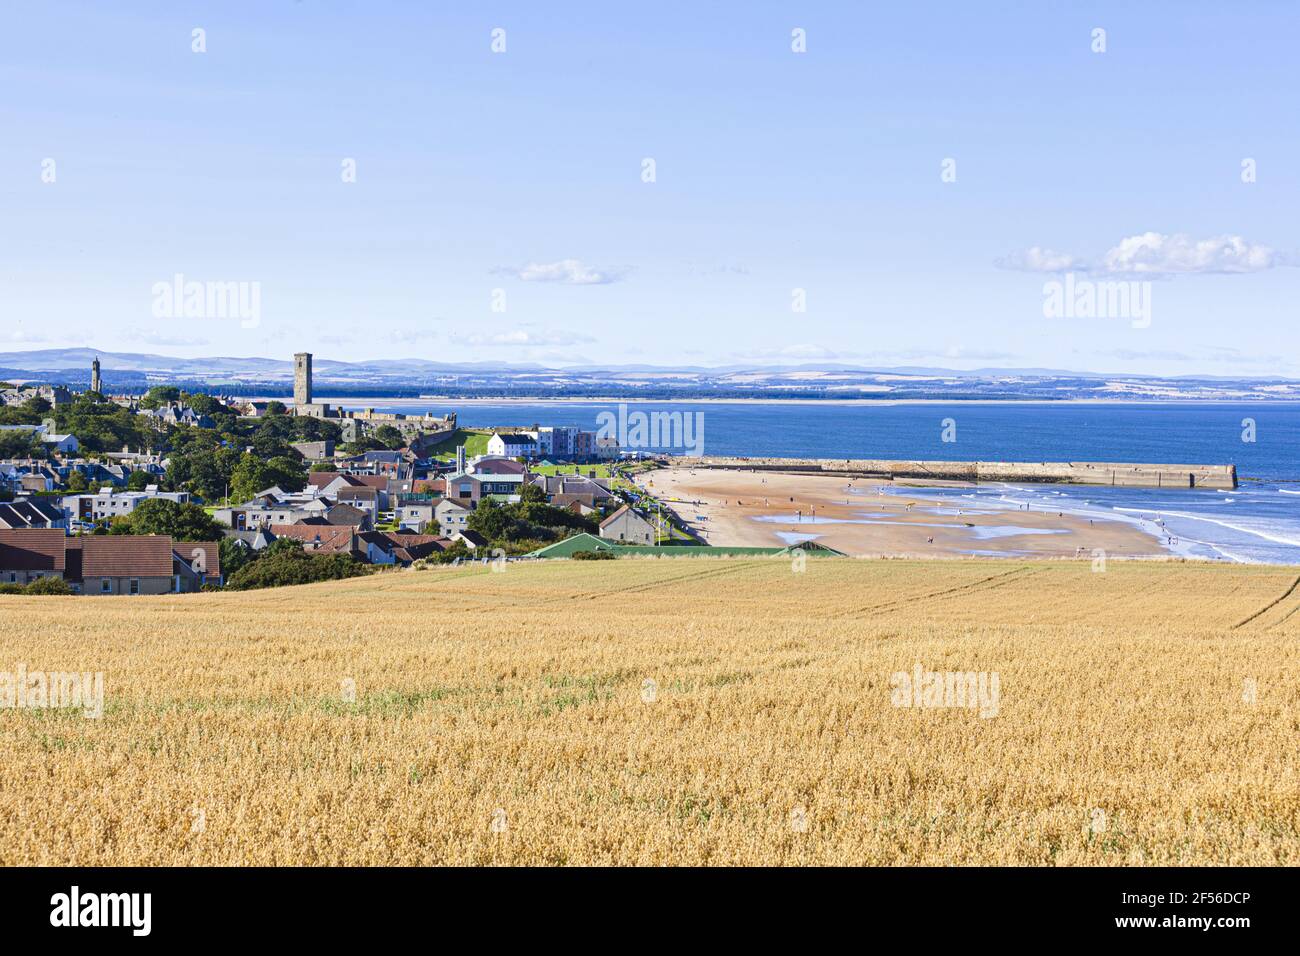 The university city of St Andrews, Fife, Scotland UK - showing East Sands and the harbour Stock Photo